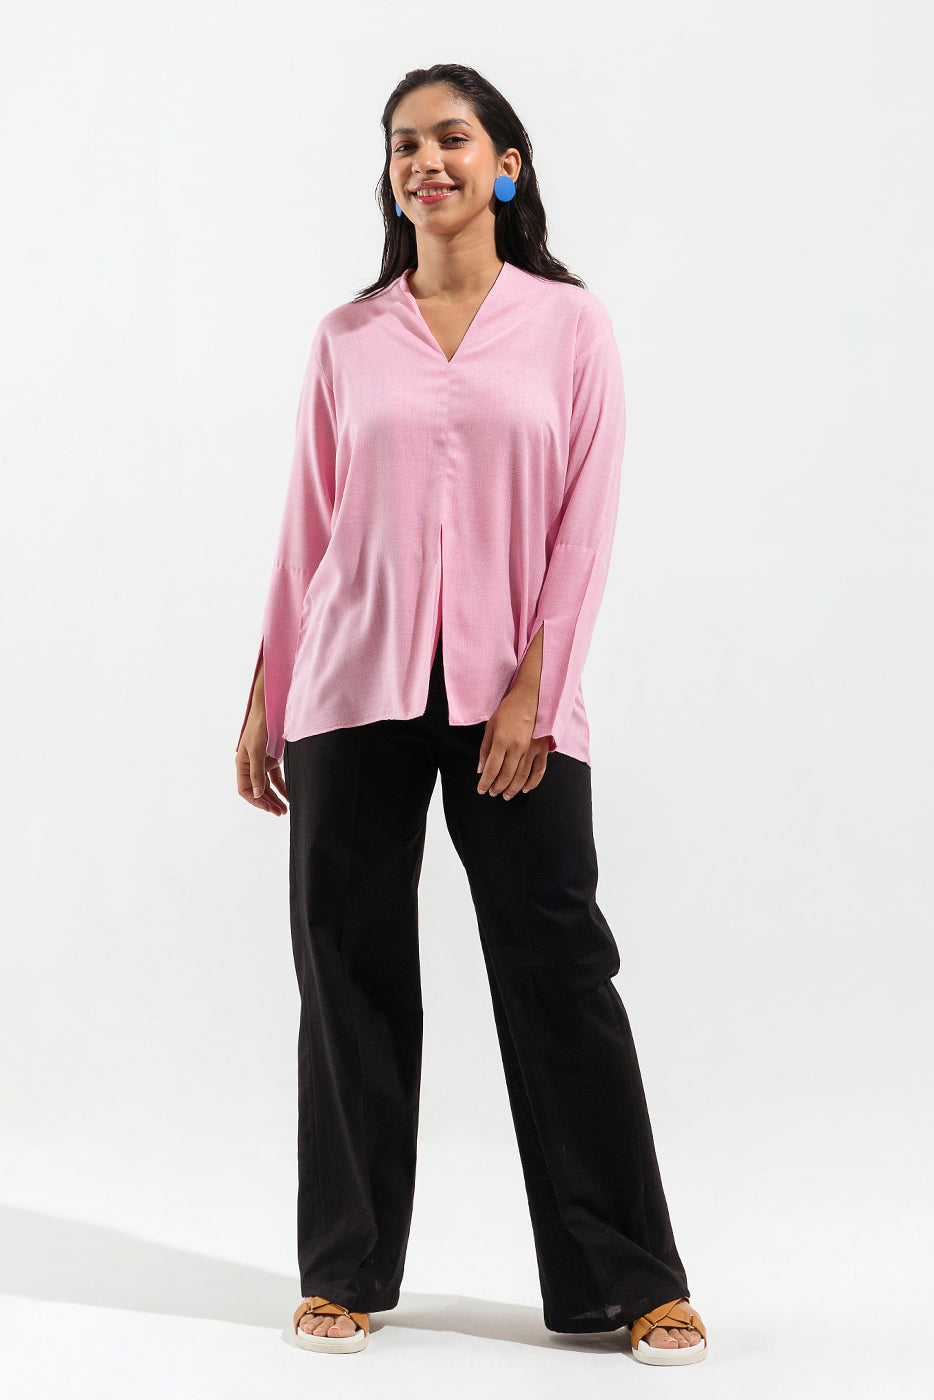 Shocking Pink High Neck Pullover – BEECHTREE